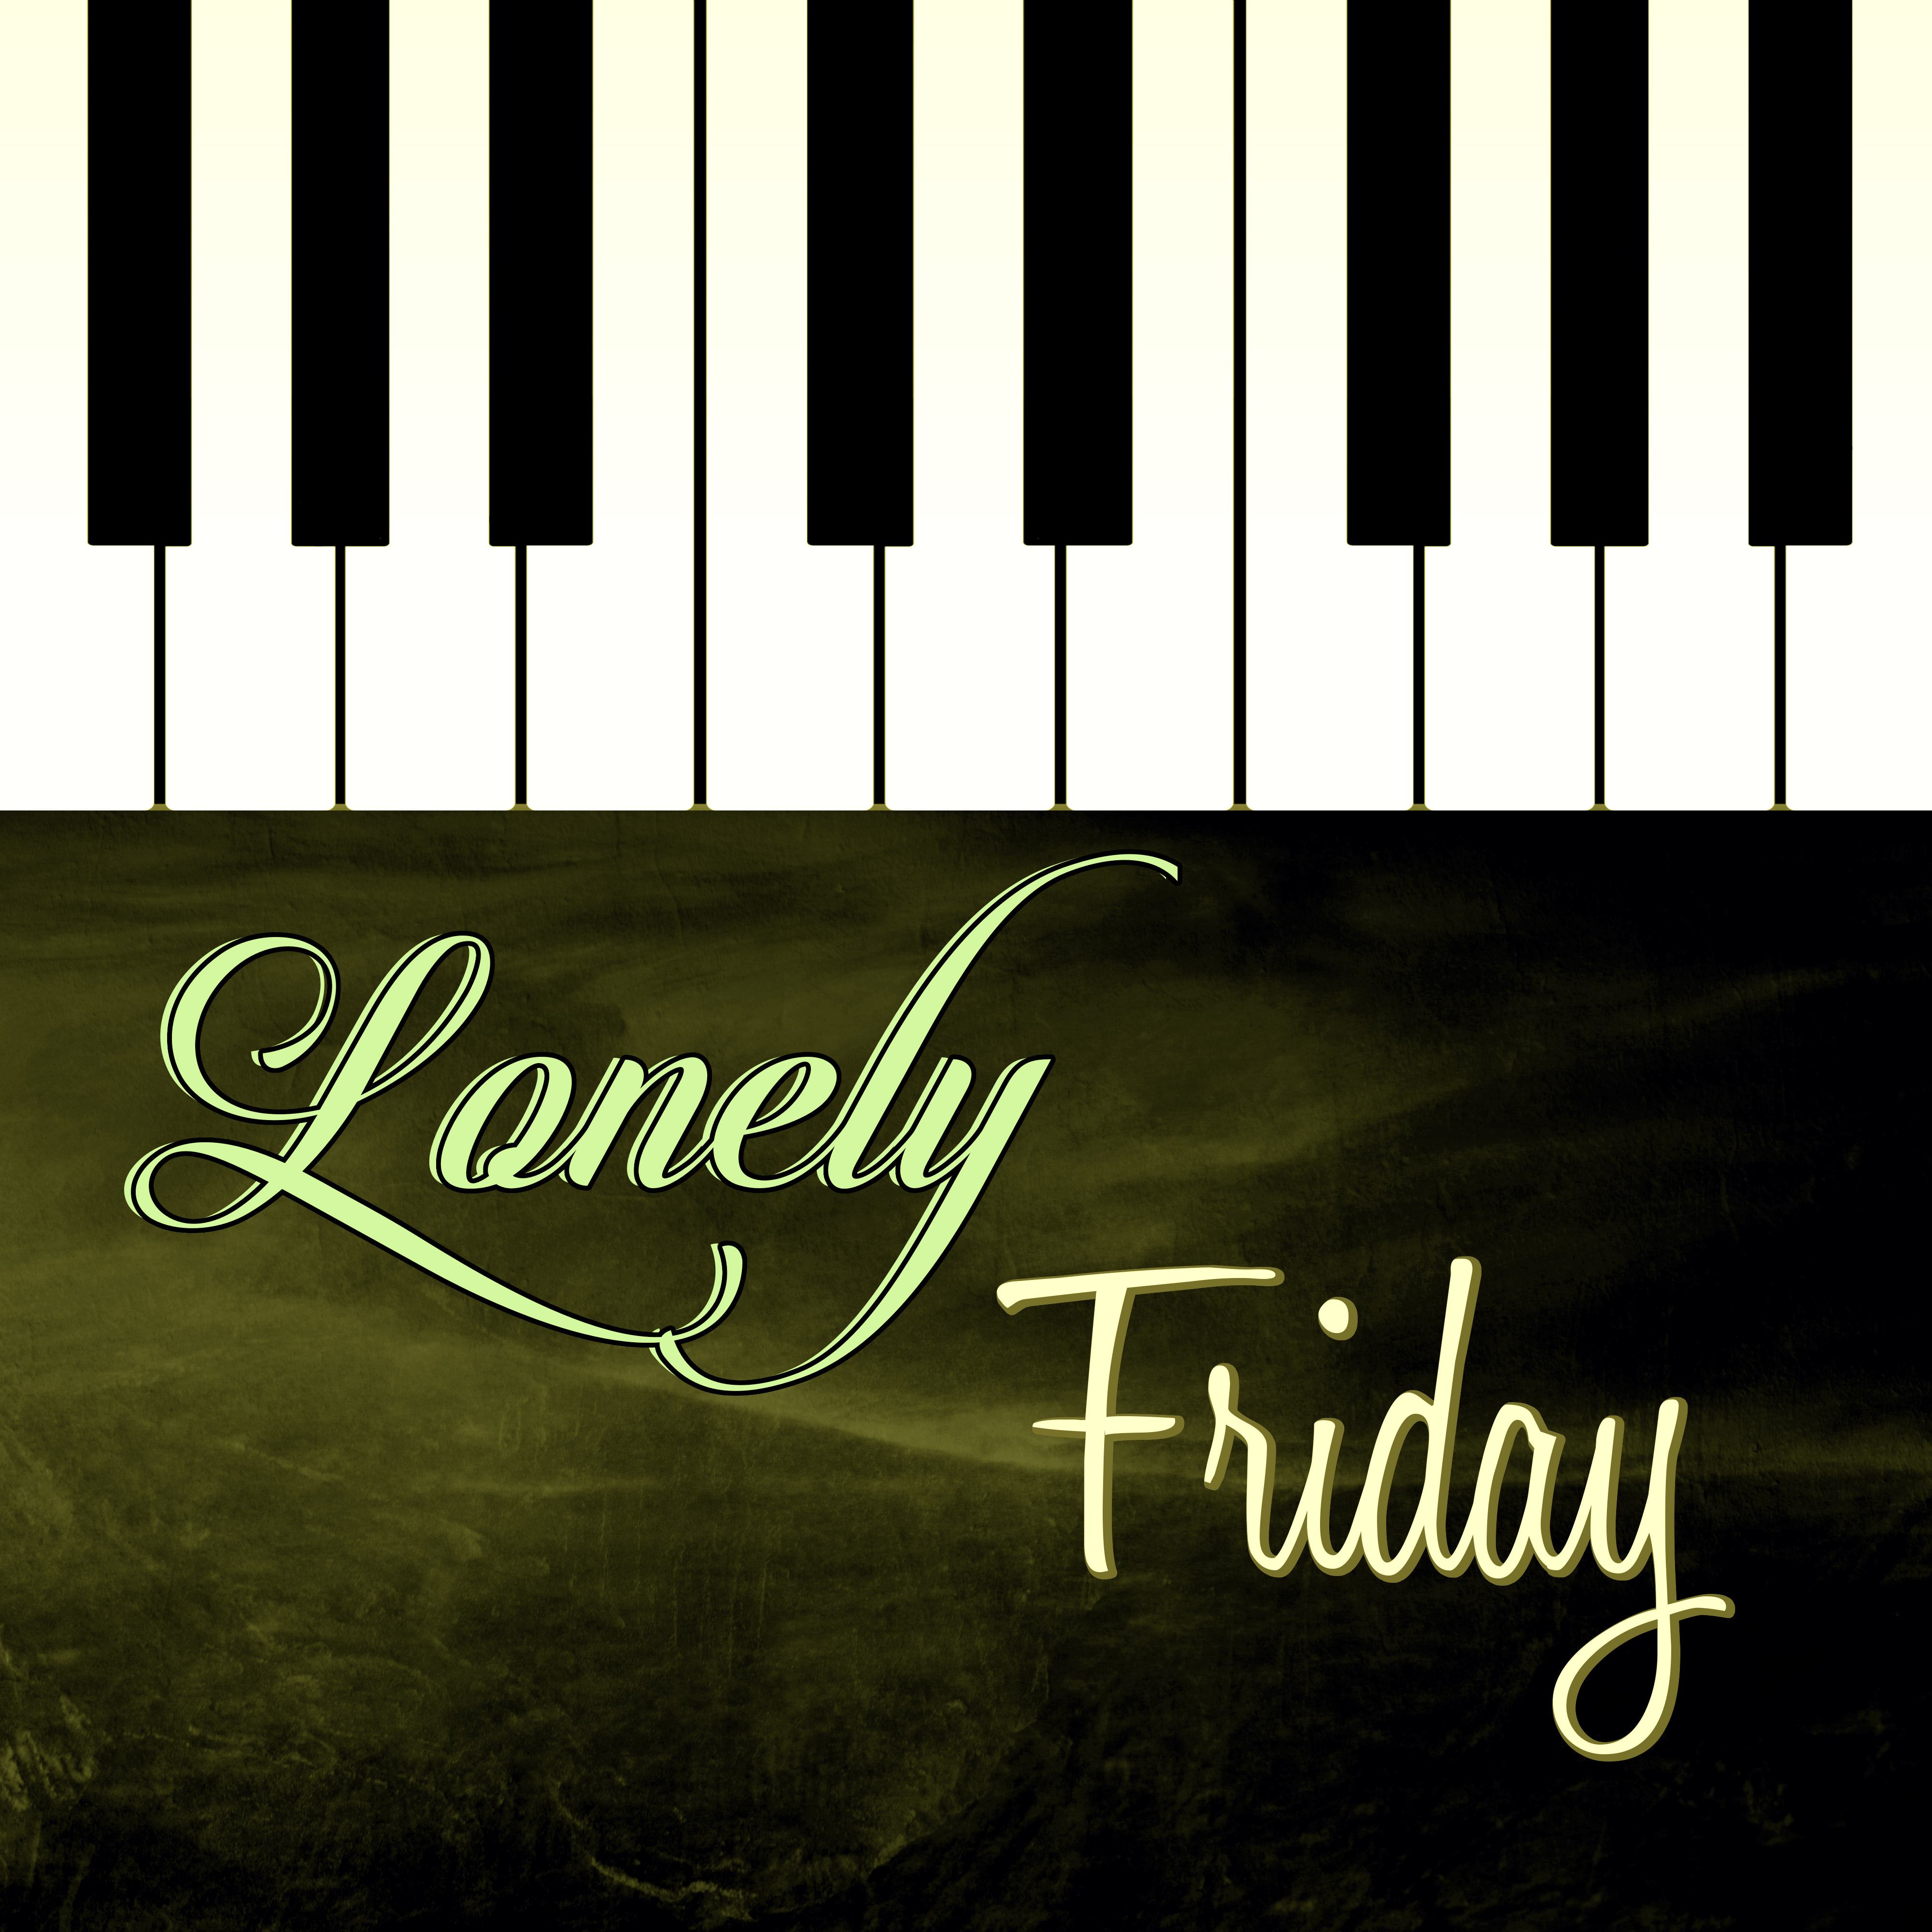 Lonely Friday - Piano Music, Smooth Jazz, Background Music, Italian Dinner, Ambient Lounge, Buddha Lounge